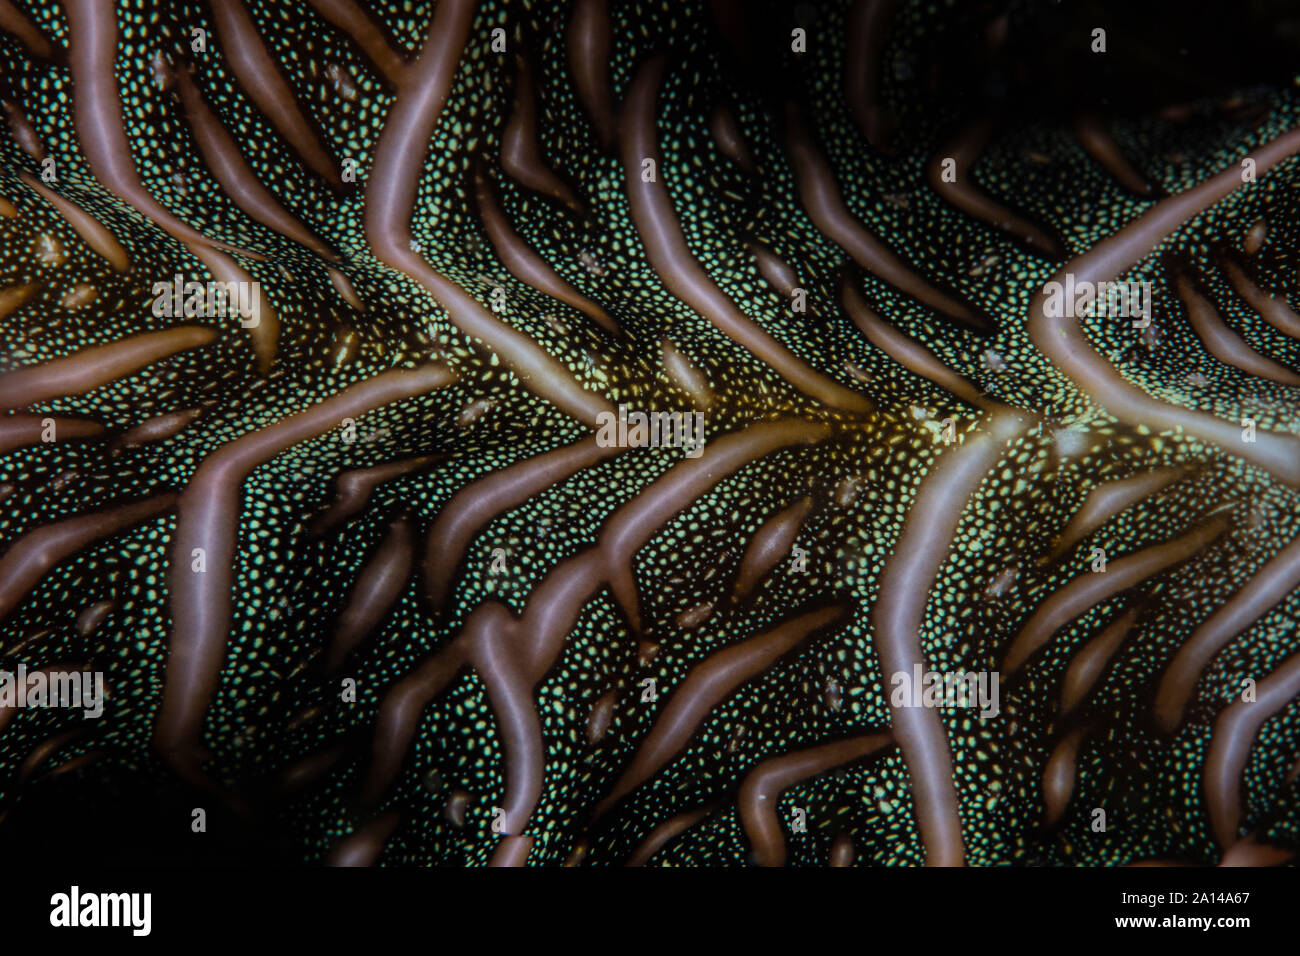 Extrem close-up of the animal markings on a Persian carpet flatworm. Stock Photo